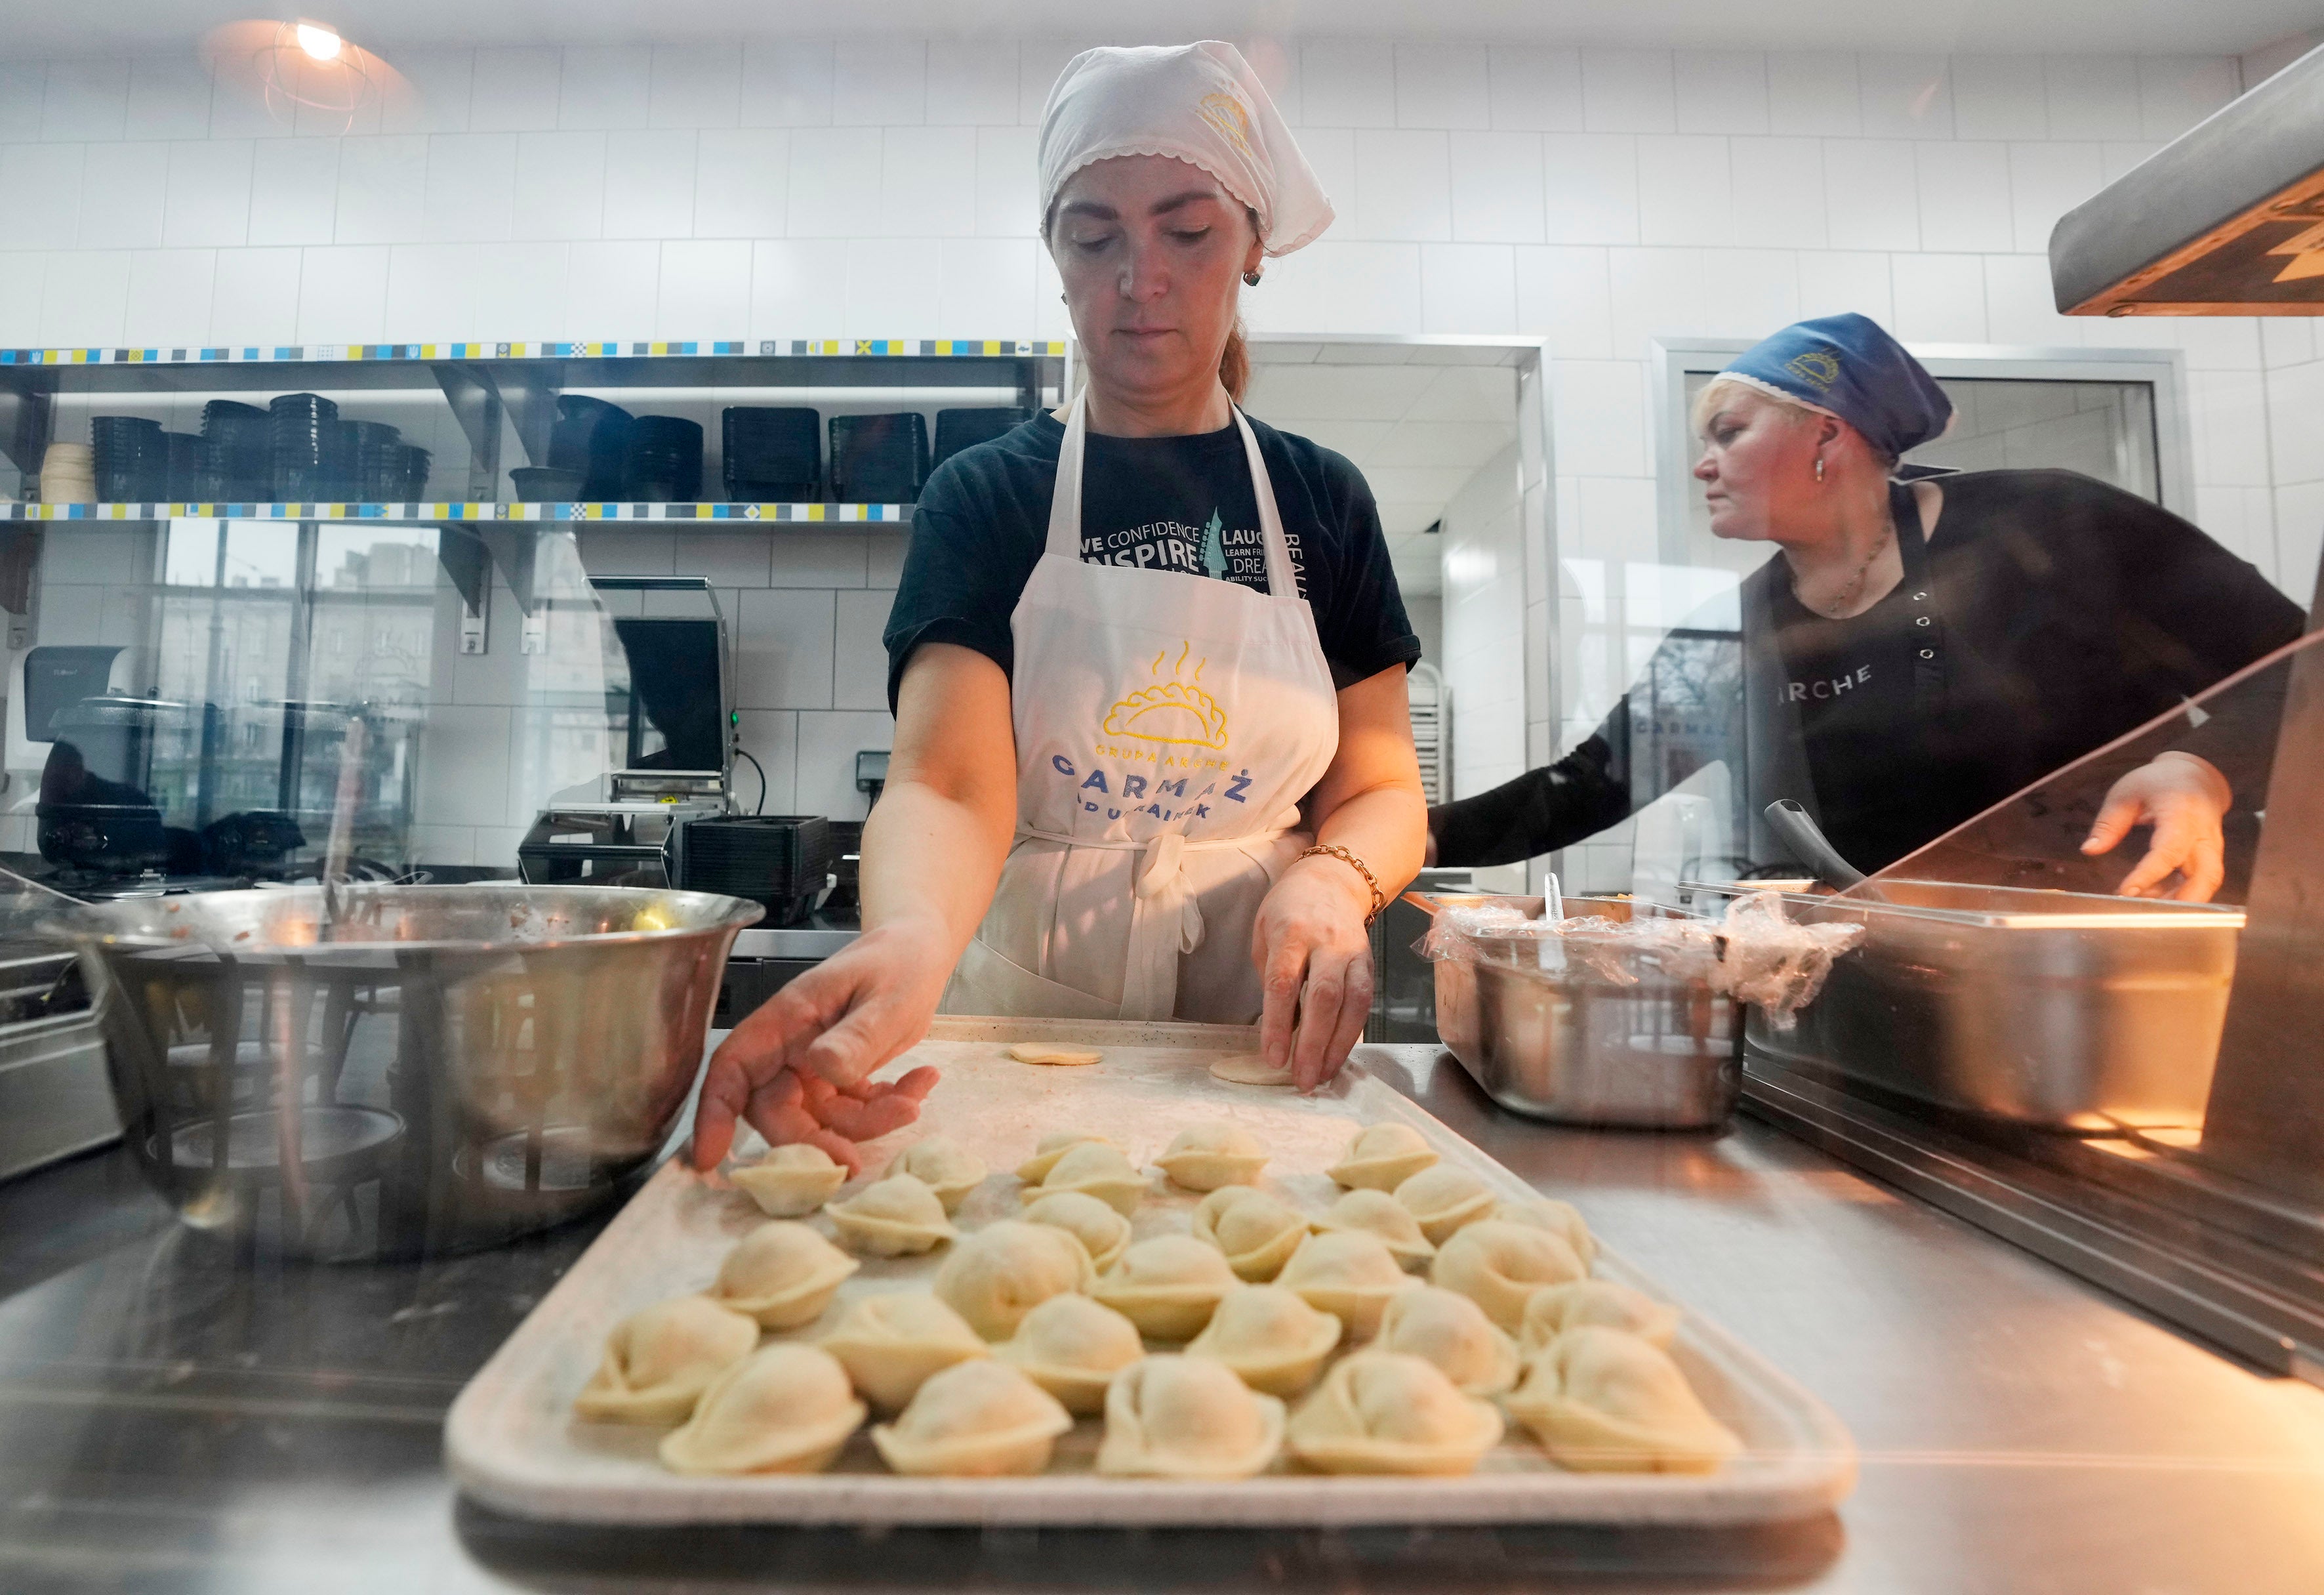 A food bar was launched in Poland specially to provide employment to refugees